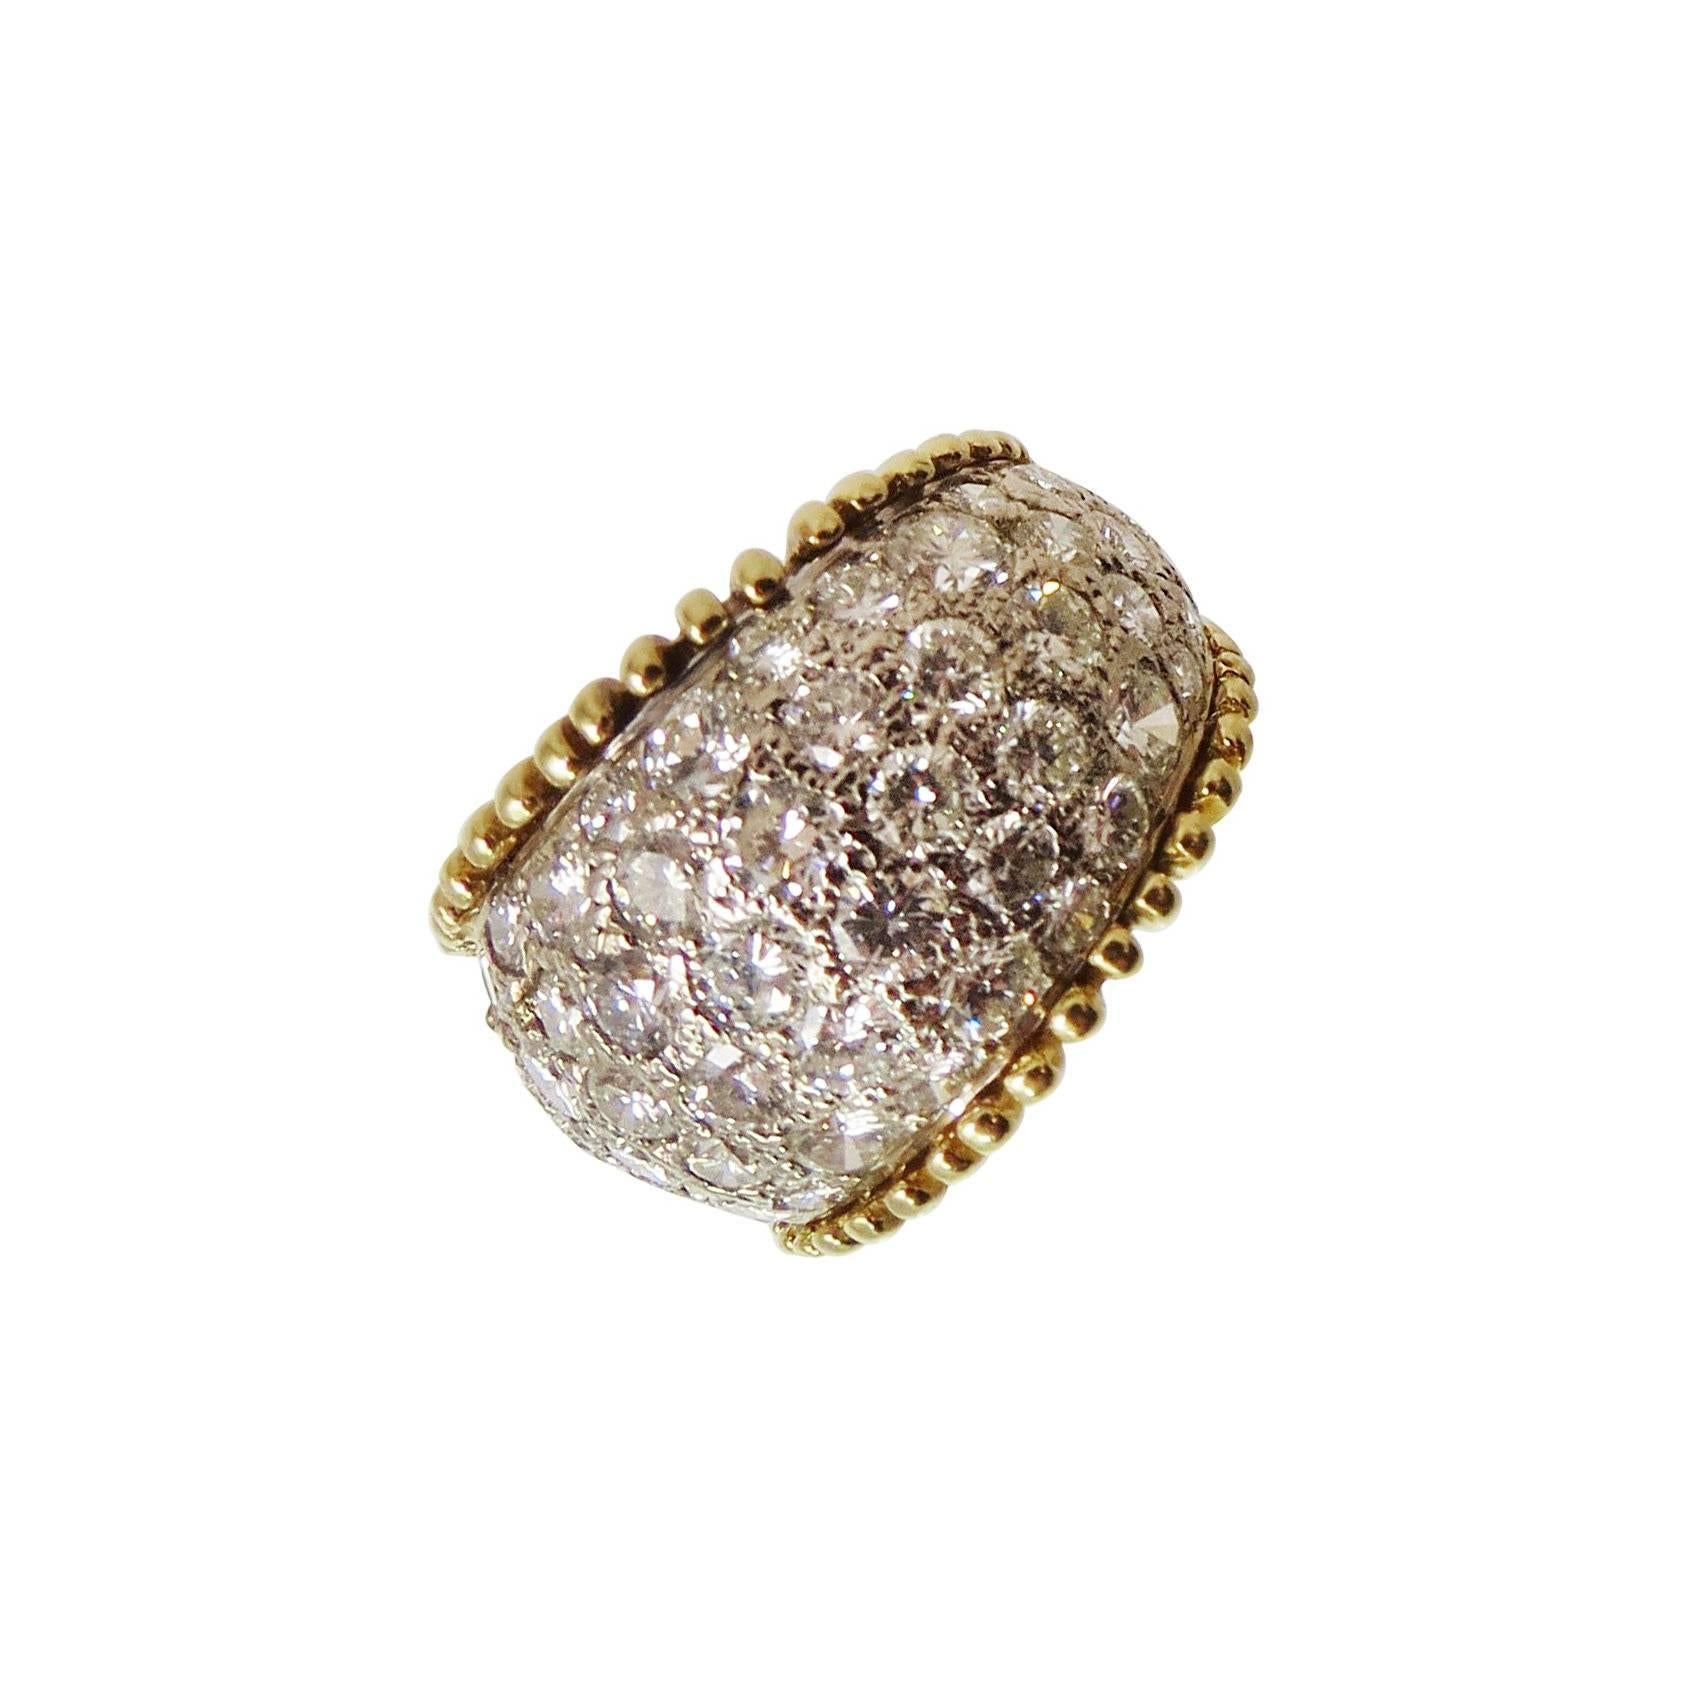 18K Yellow and White Gold Diamond Pave Band Ring with Beaded Edge